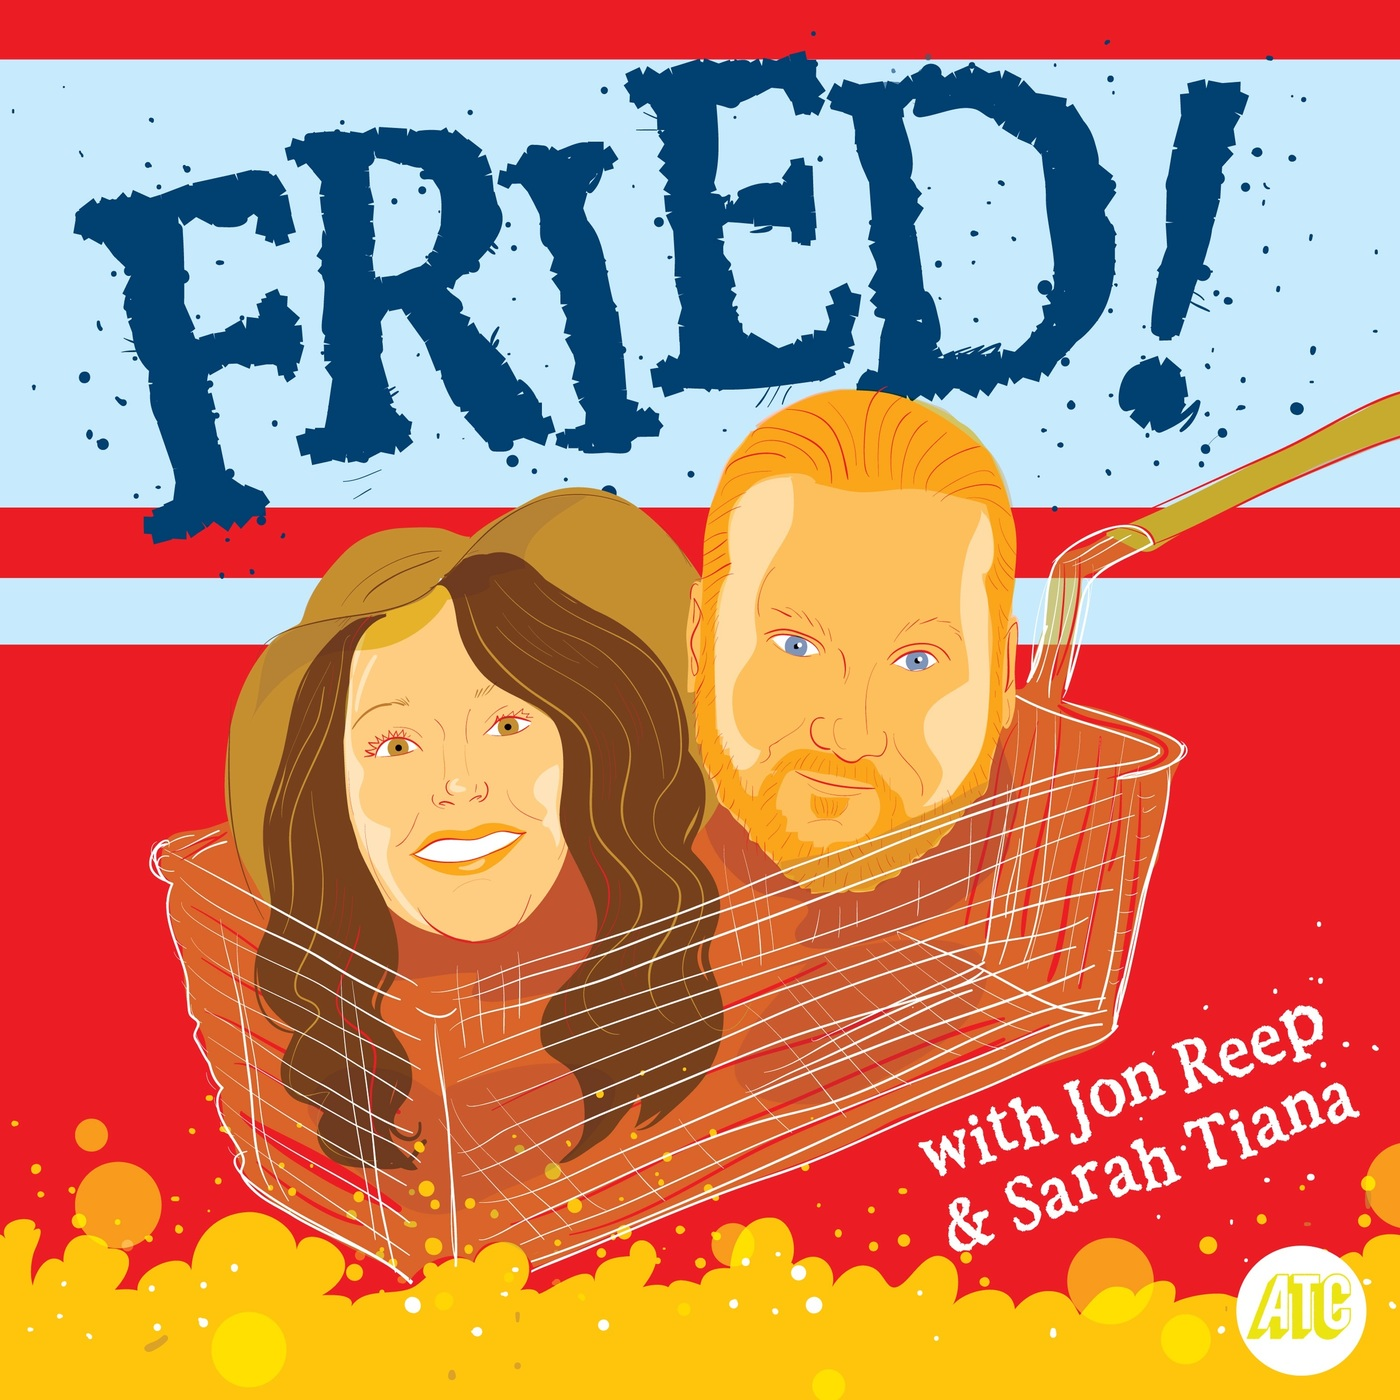 Episode 31 - Sandy's Fish Fried